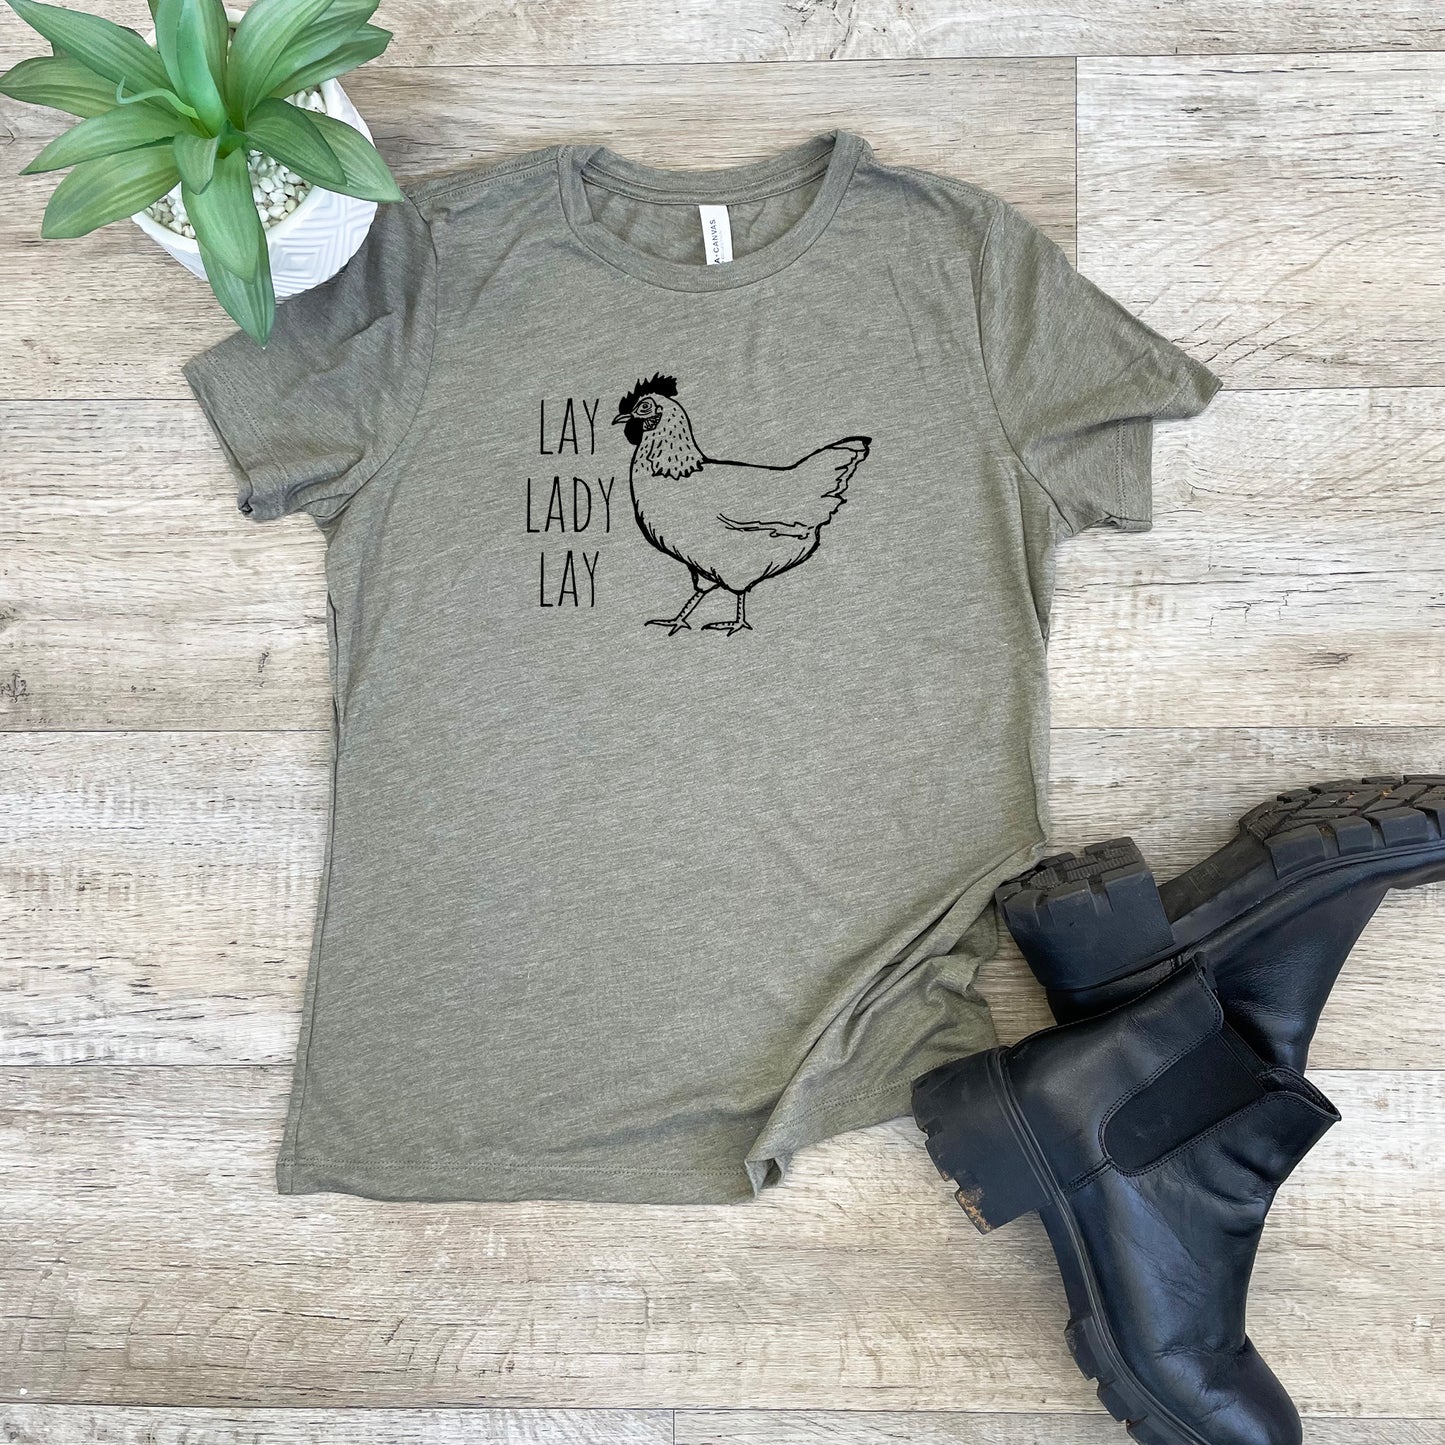 Lay Lady Lay (Chicken) - Women's Crew Tee - Olive or Dusty Blue